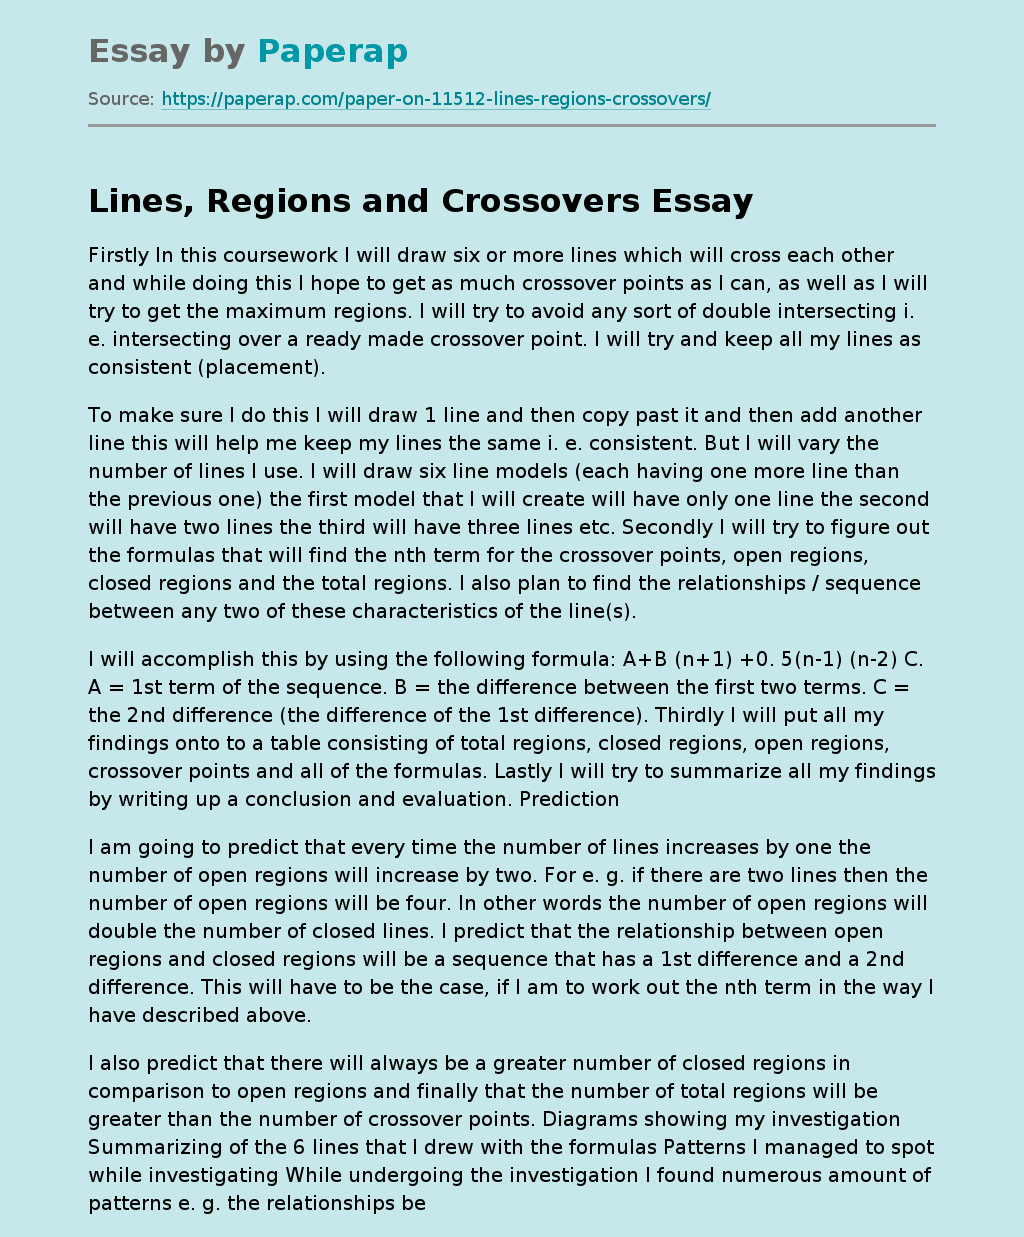 Lines, Regions and Crossovers